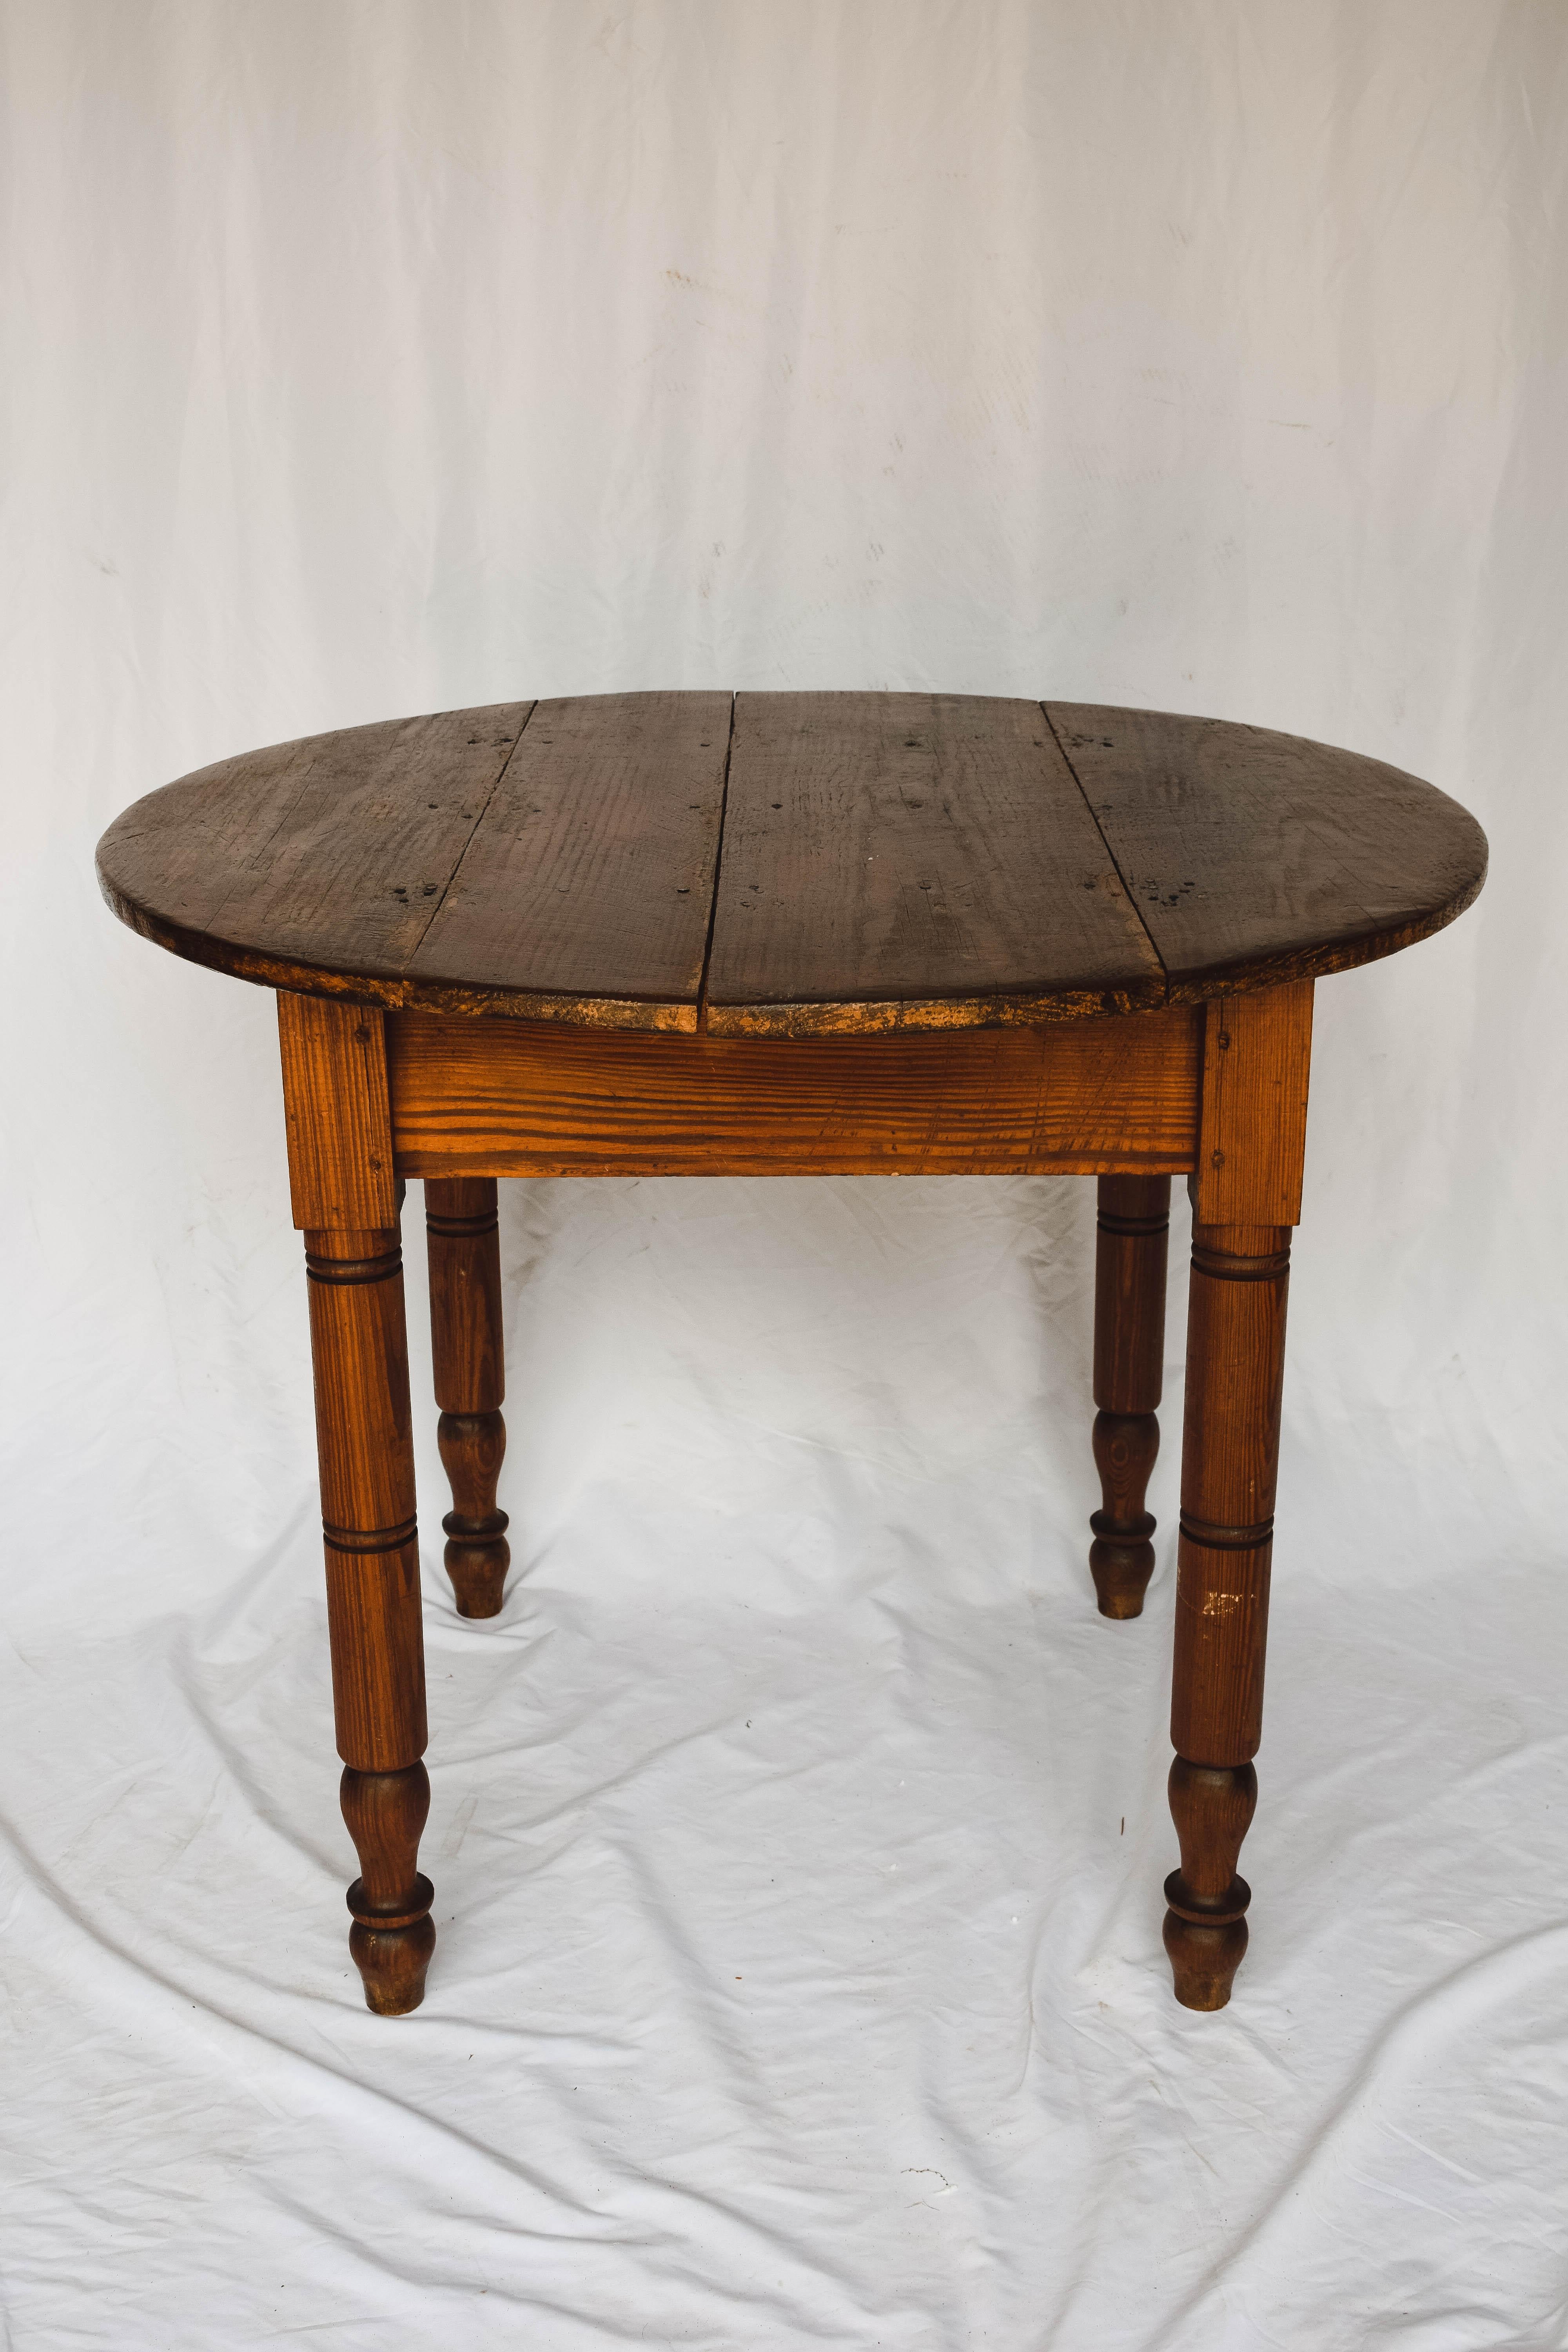 This antique round Tavern table is constructed with a plank top and sits on four turned legs. The top is removable for ease of mobility.